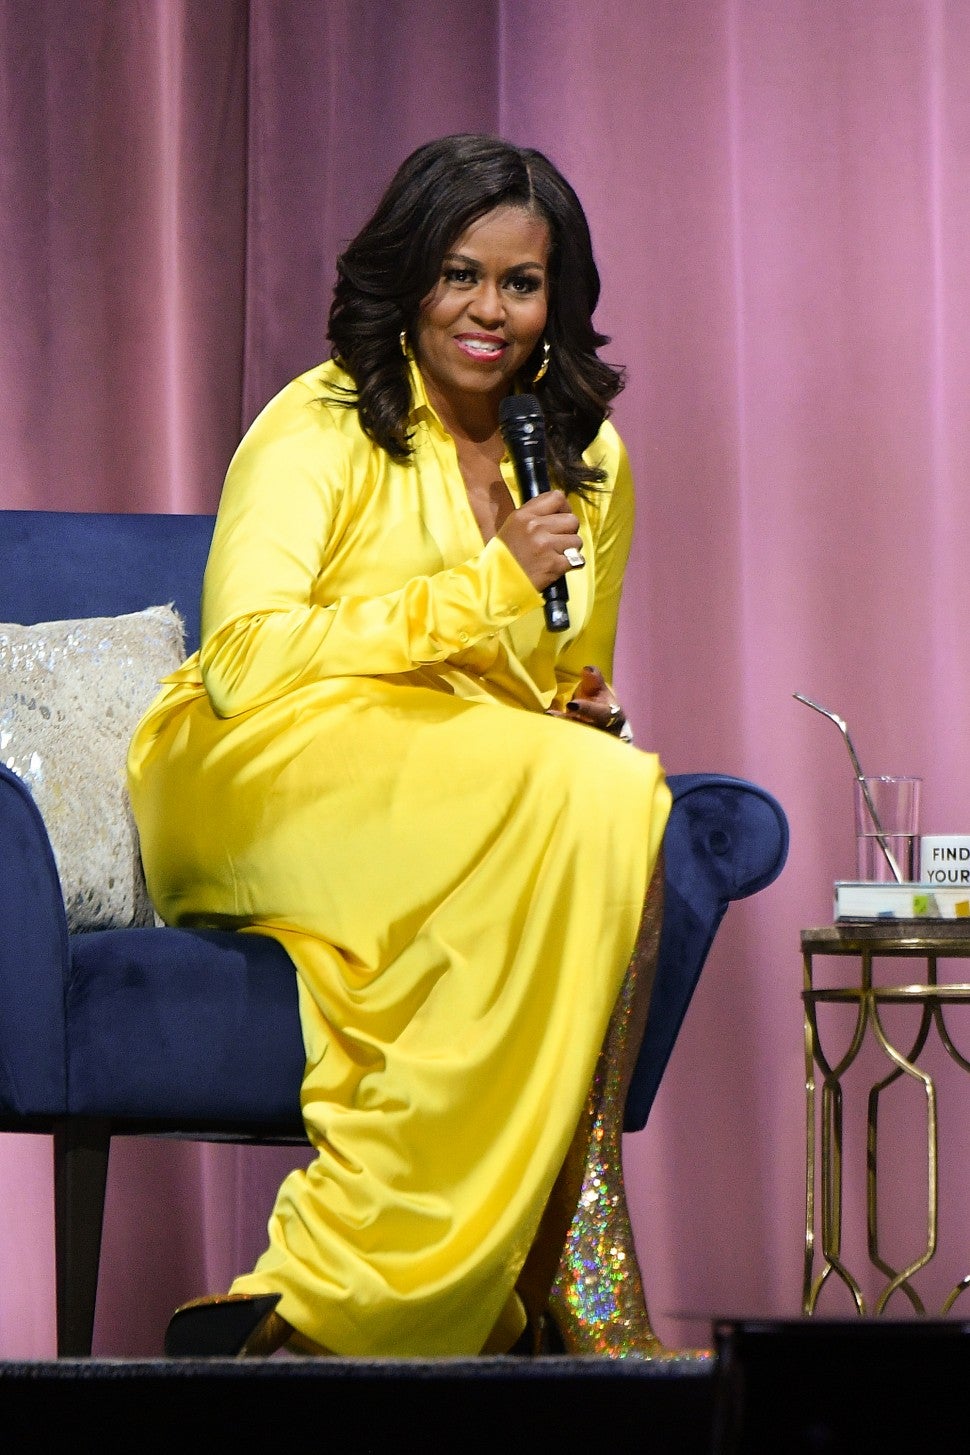 michelle obama sparkly thigh high boots